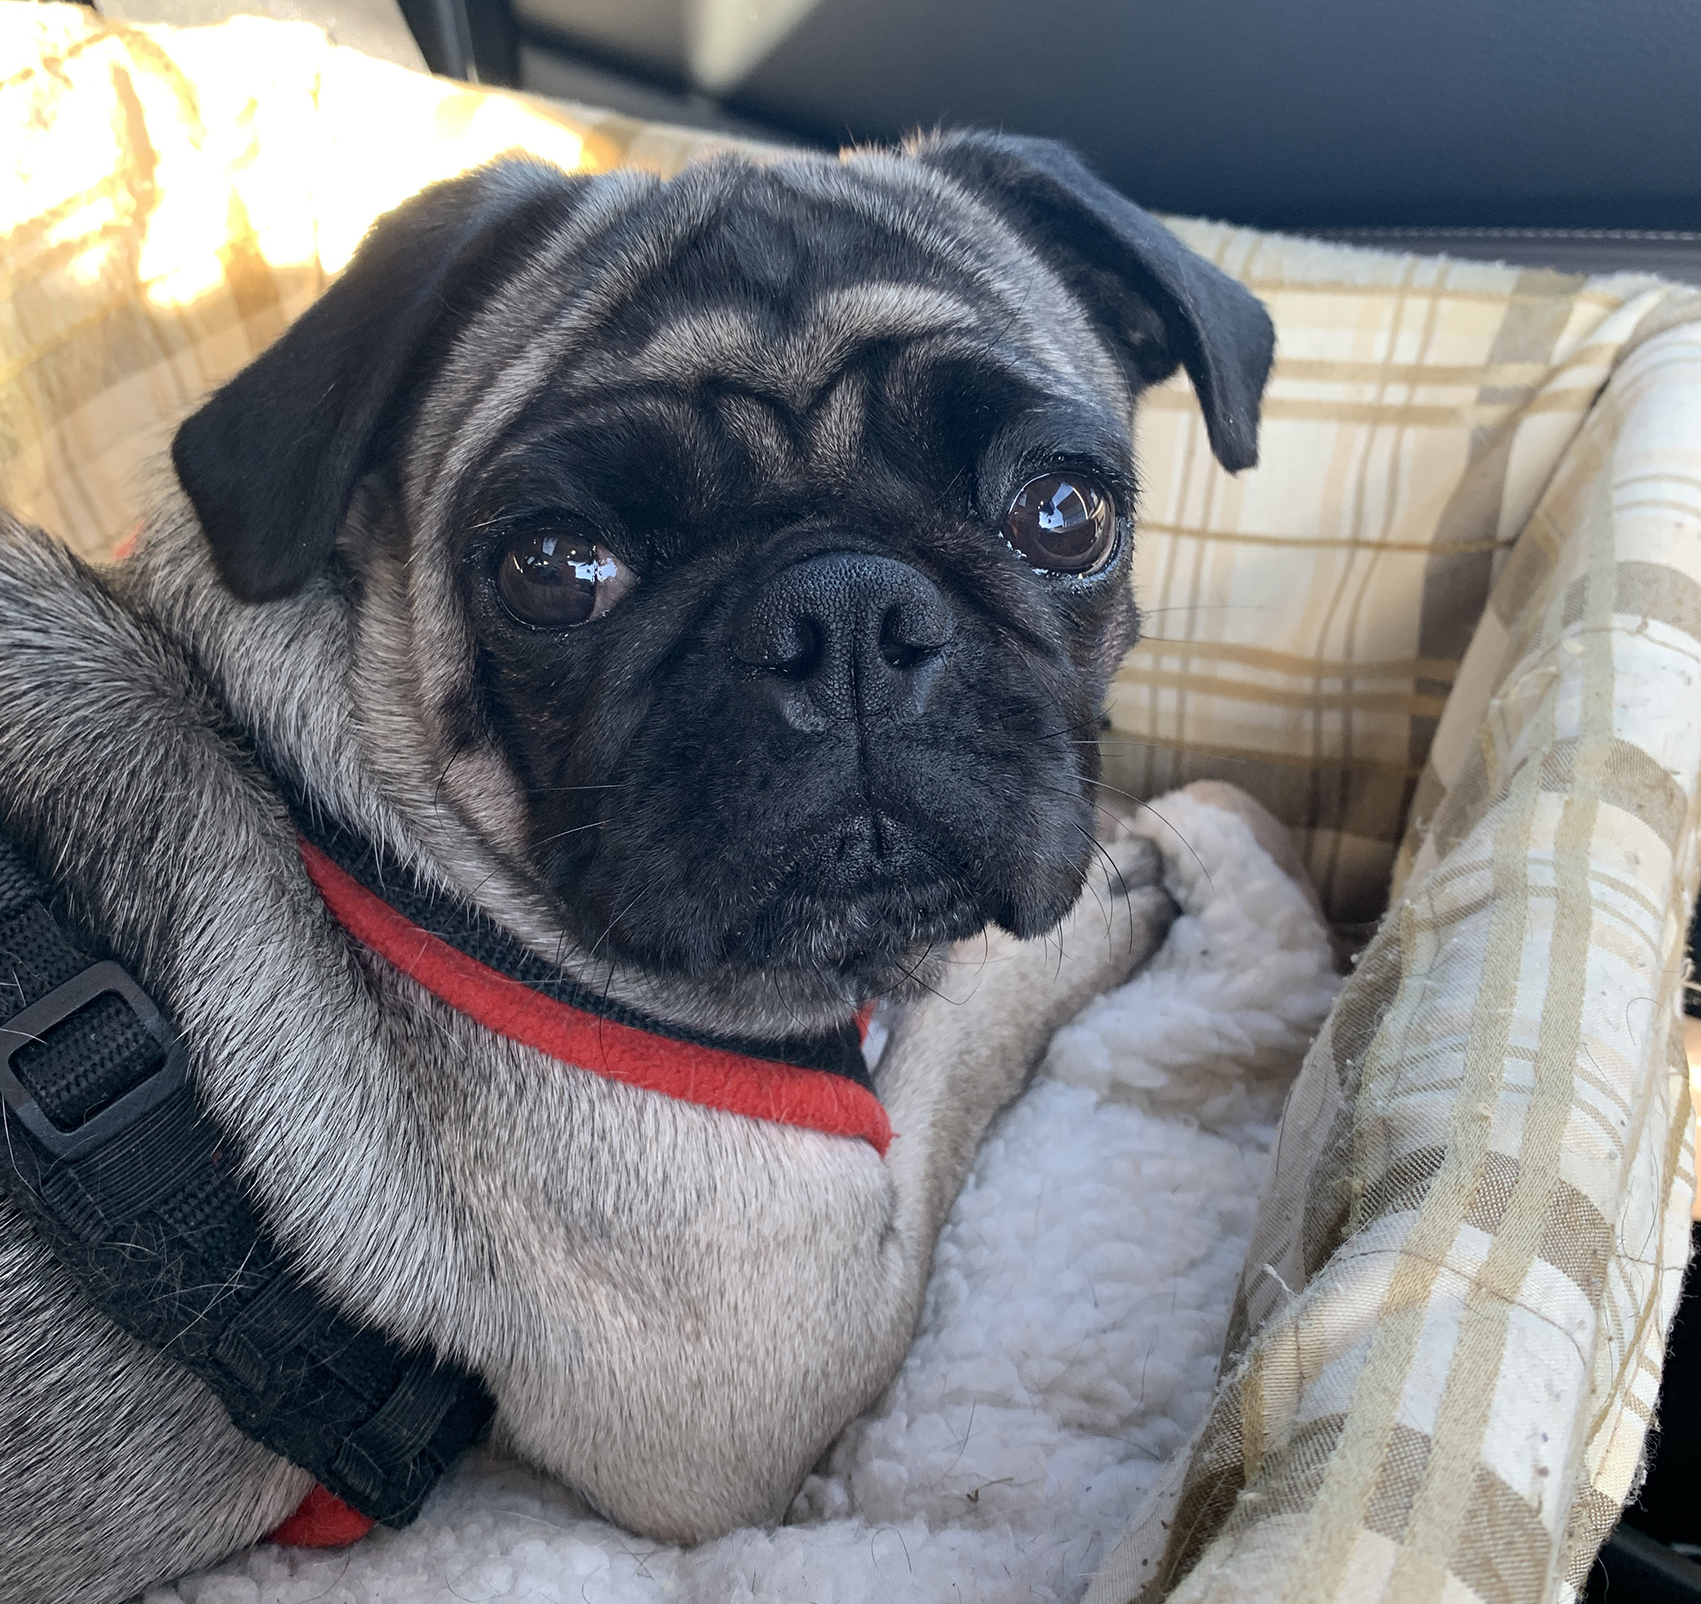 Adoption for Bobby the pug - image Wilma on https://pugprotectiontrust.org